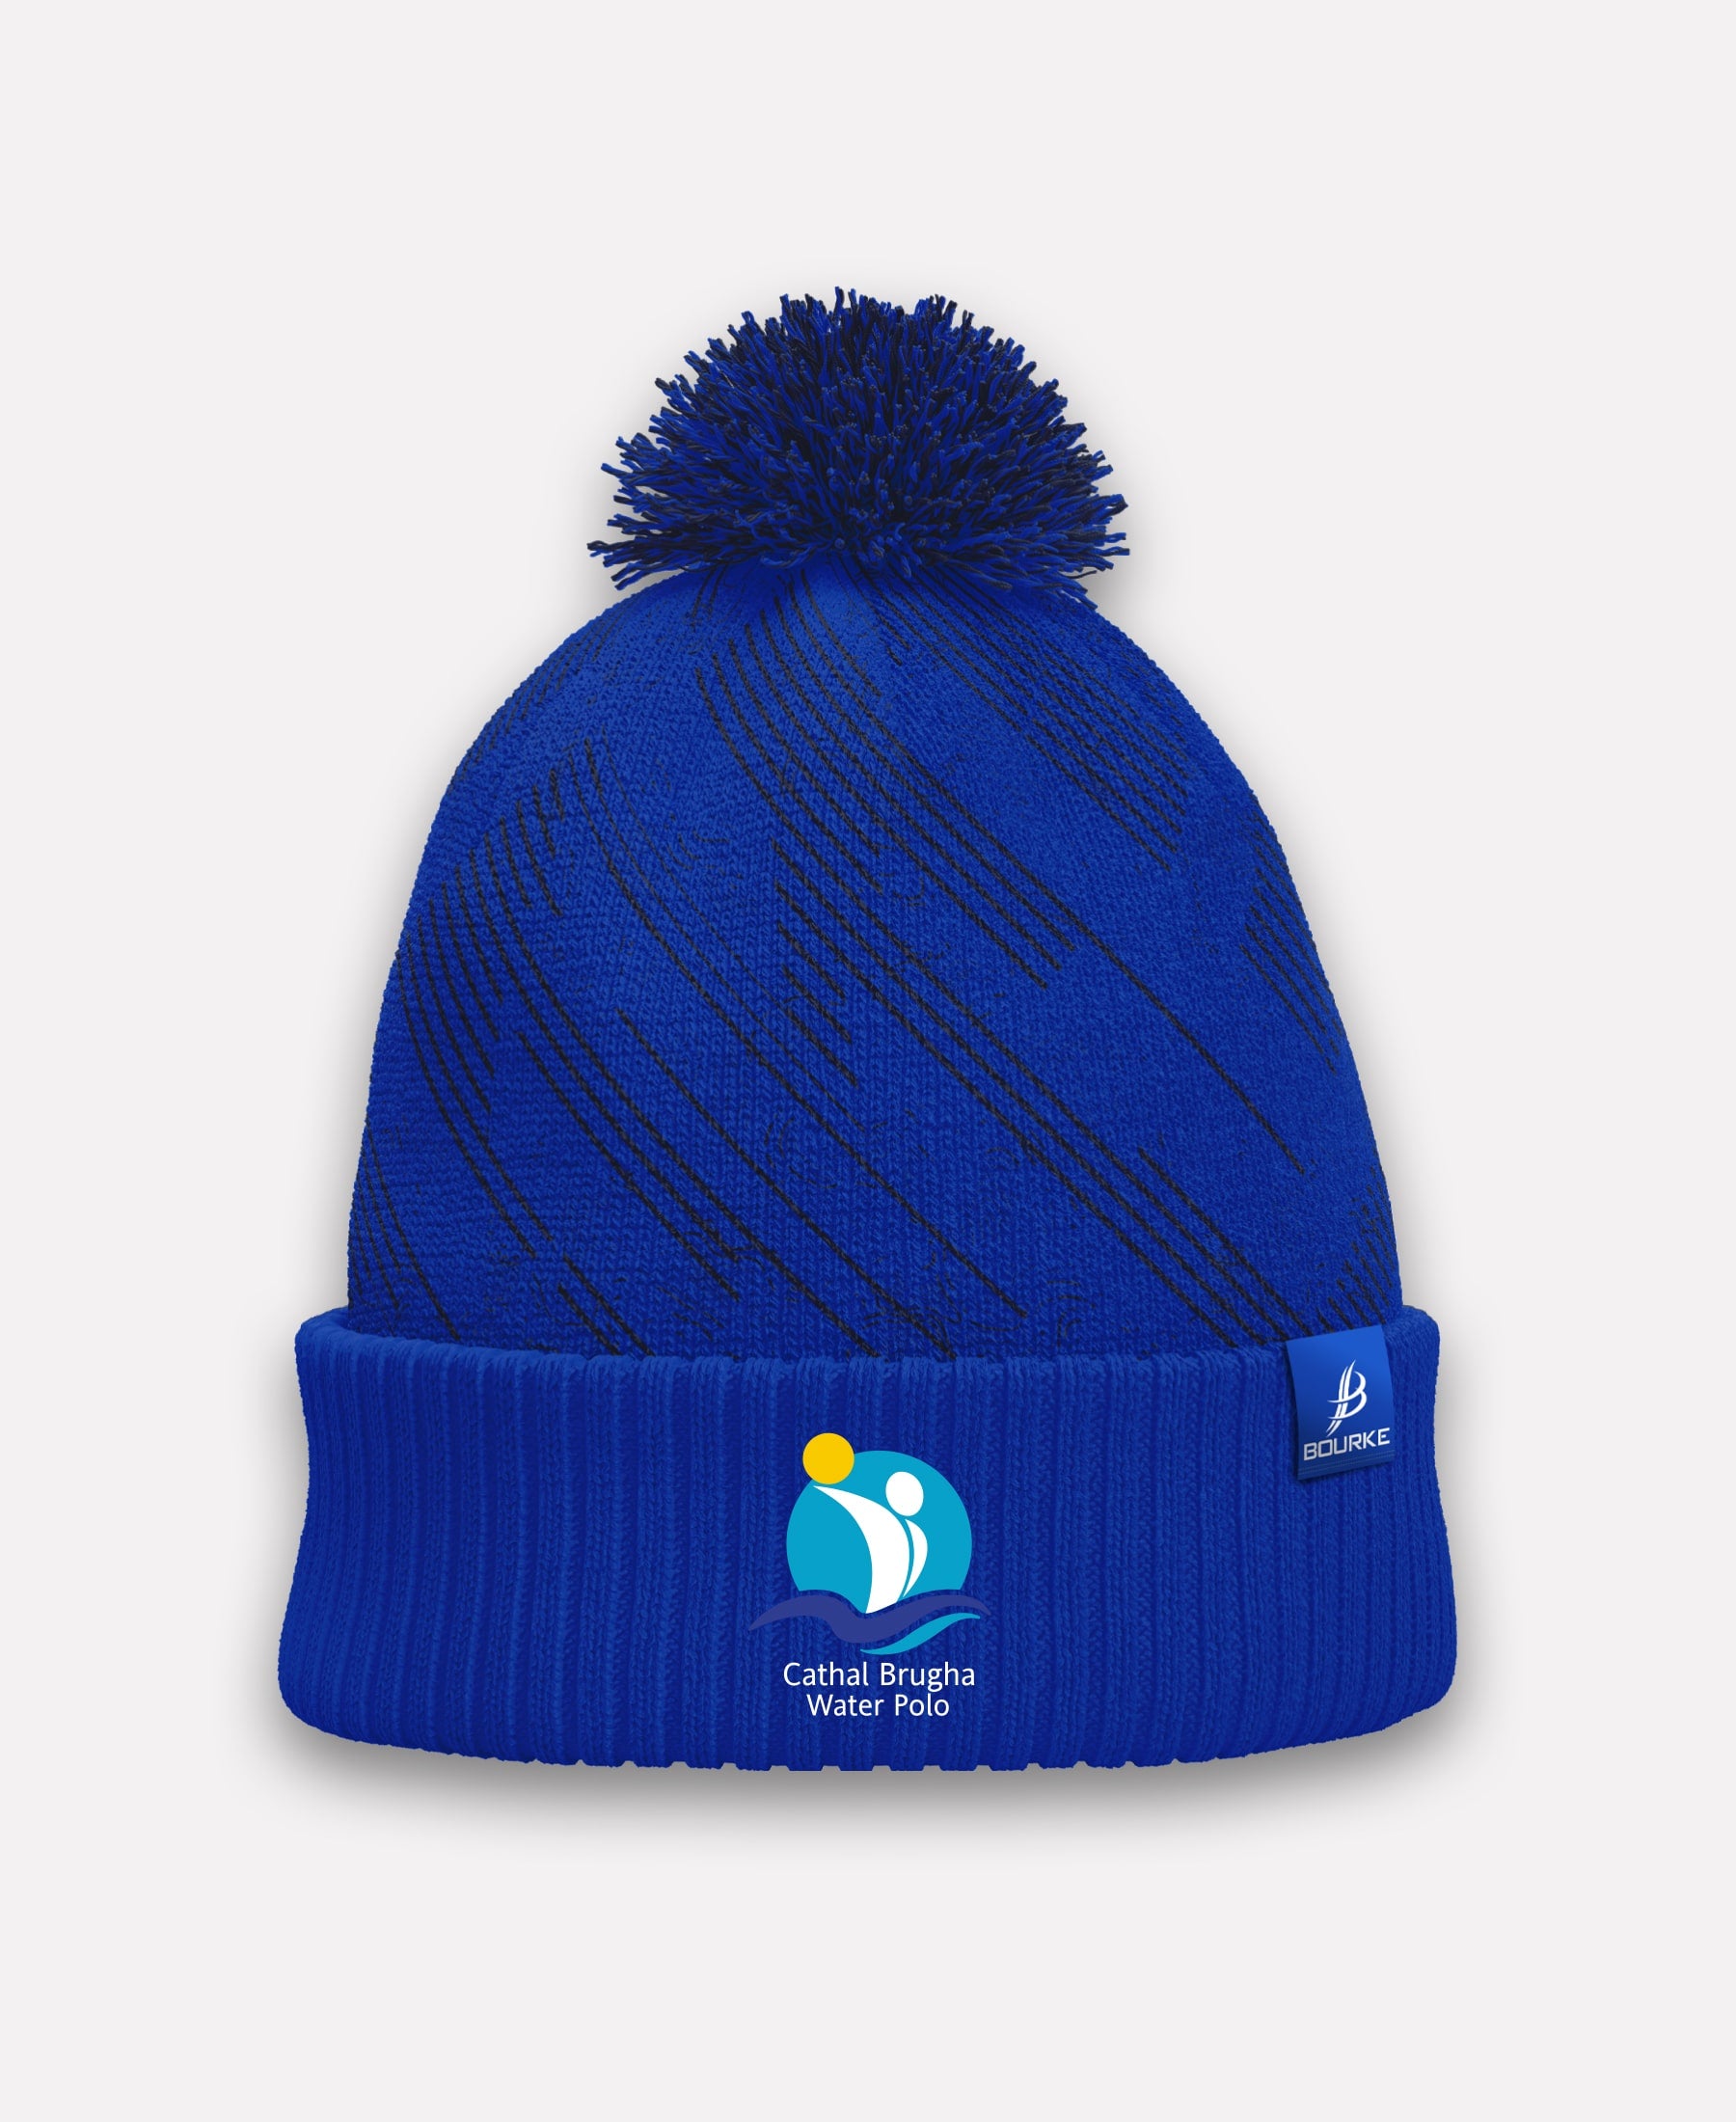 Cathal Brugha Water Polo BARR Bobble Hat (Navy/Blue)